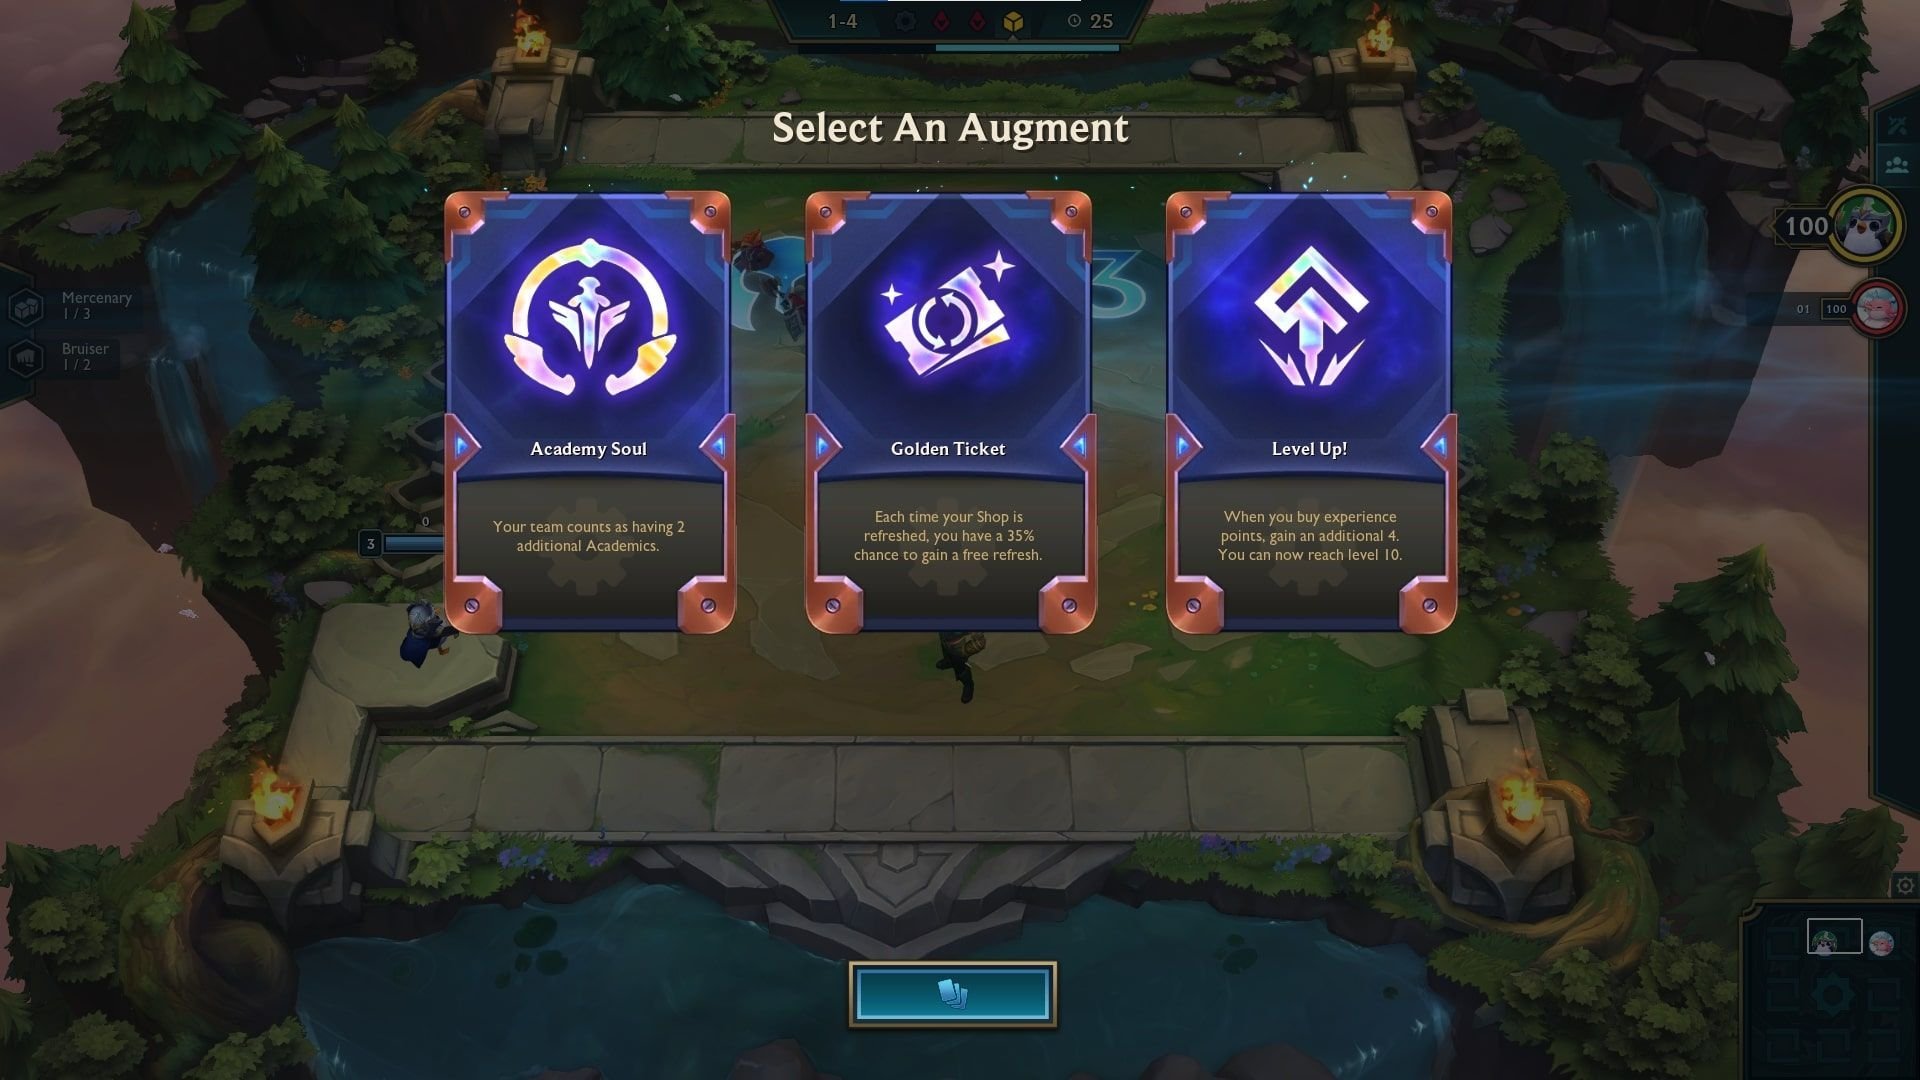 AutoChess MOBA will have its soft launch on December 1st, Pre